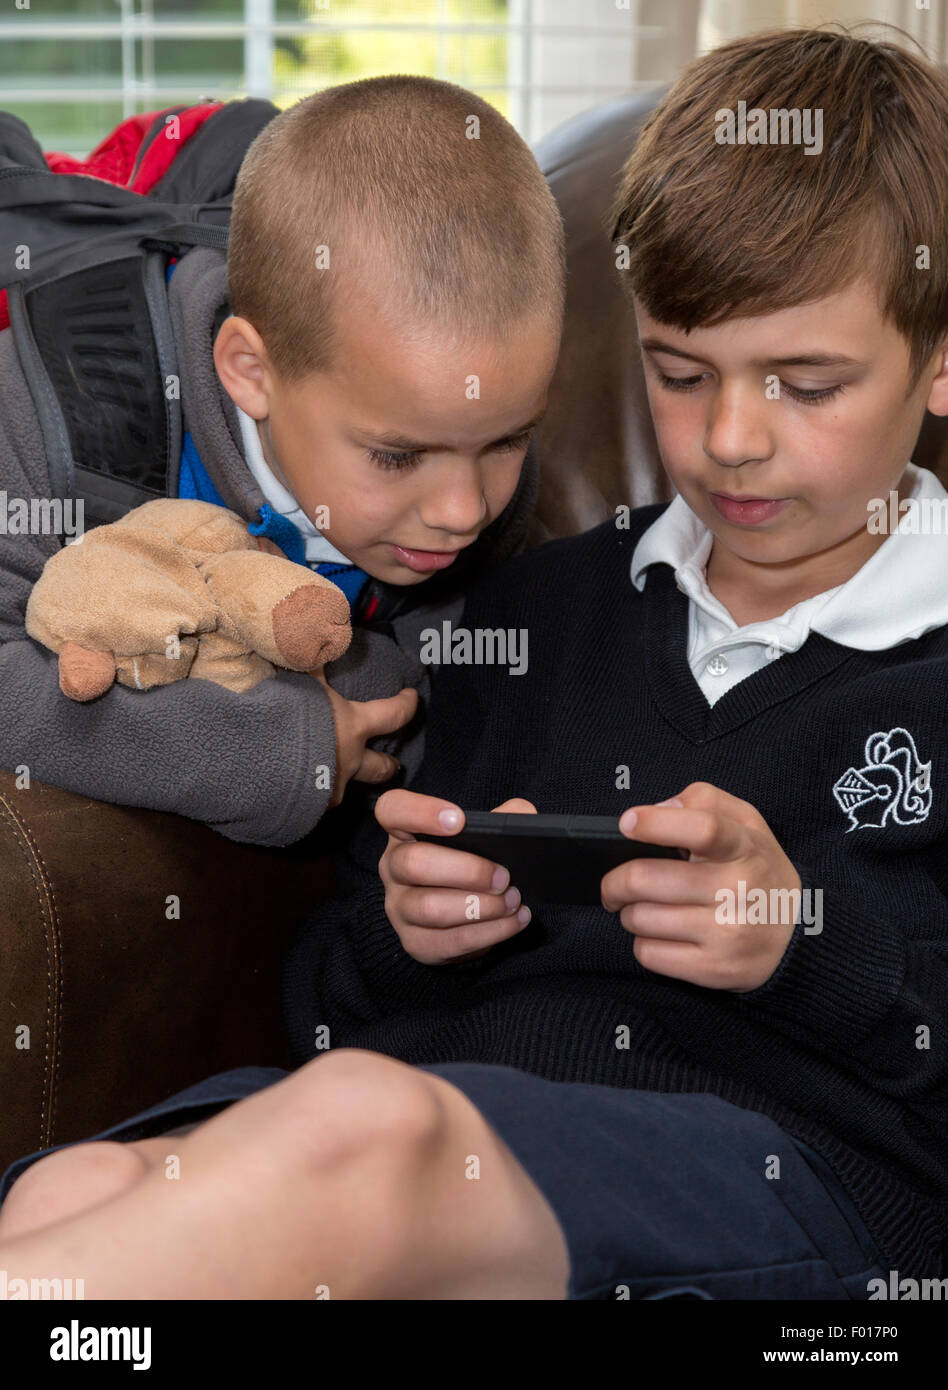 Younger Brother (Age 7) Watching Older Brother (Age 9) Using his iPod.  MR Stock Photo